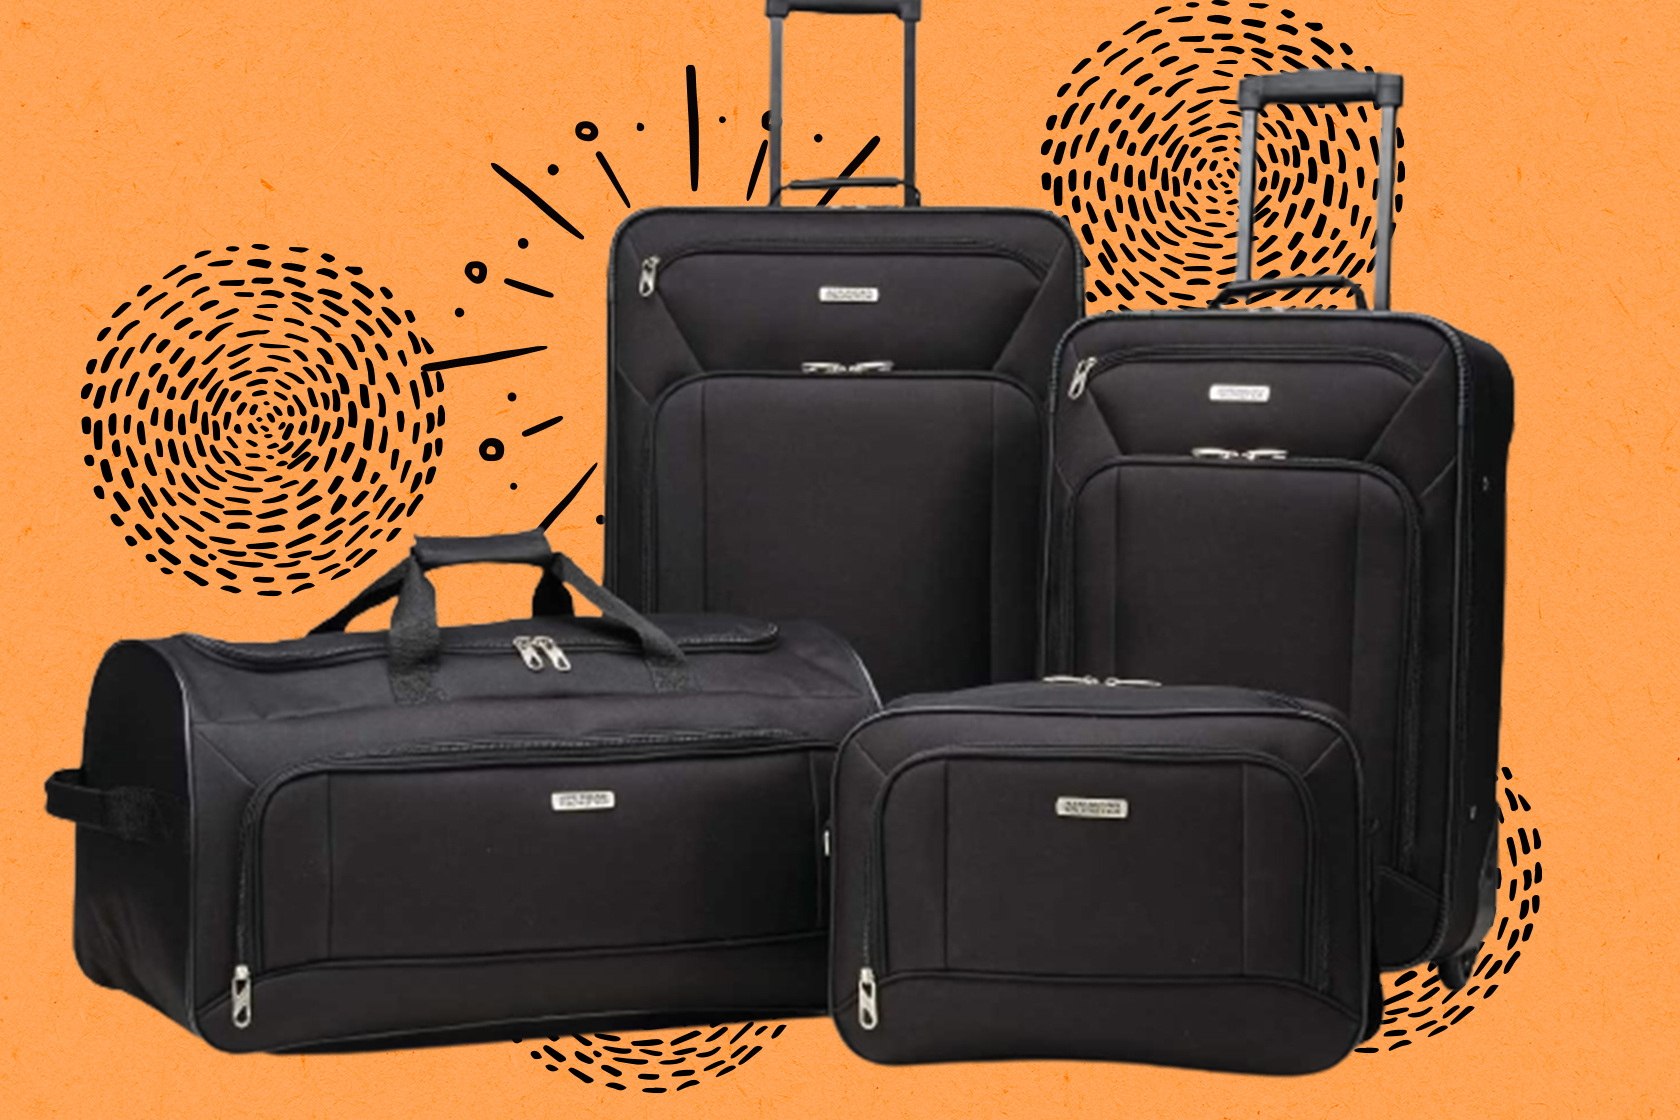 Get a 4-piece American Tourister luggage set for at Amazon